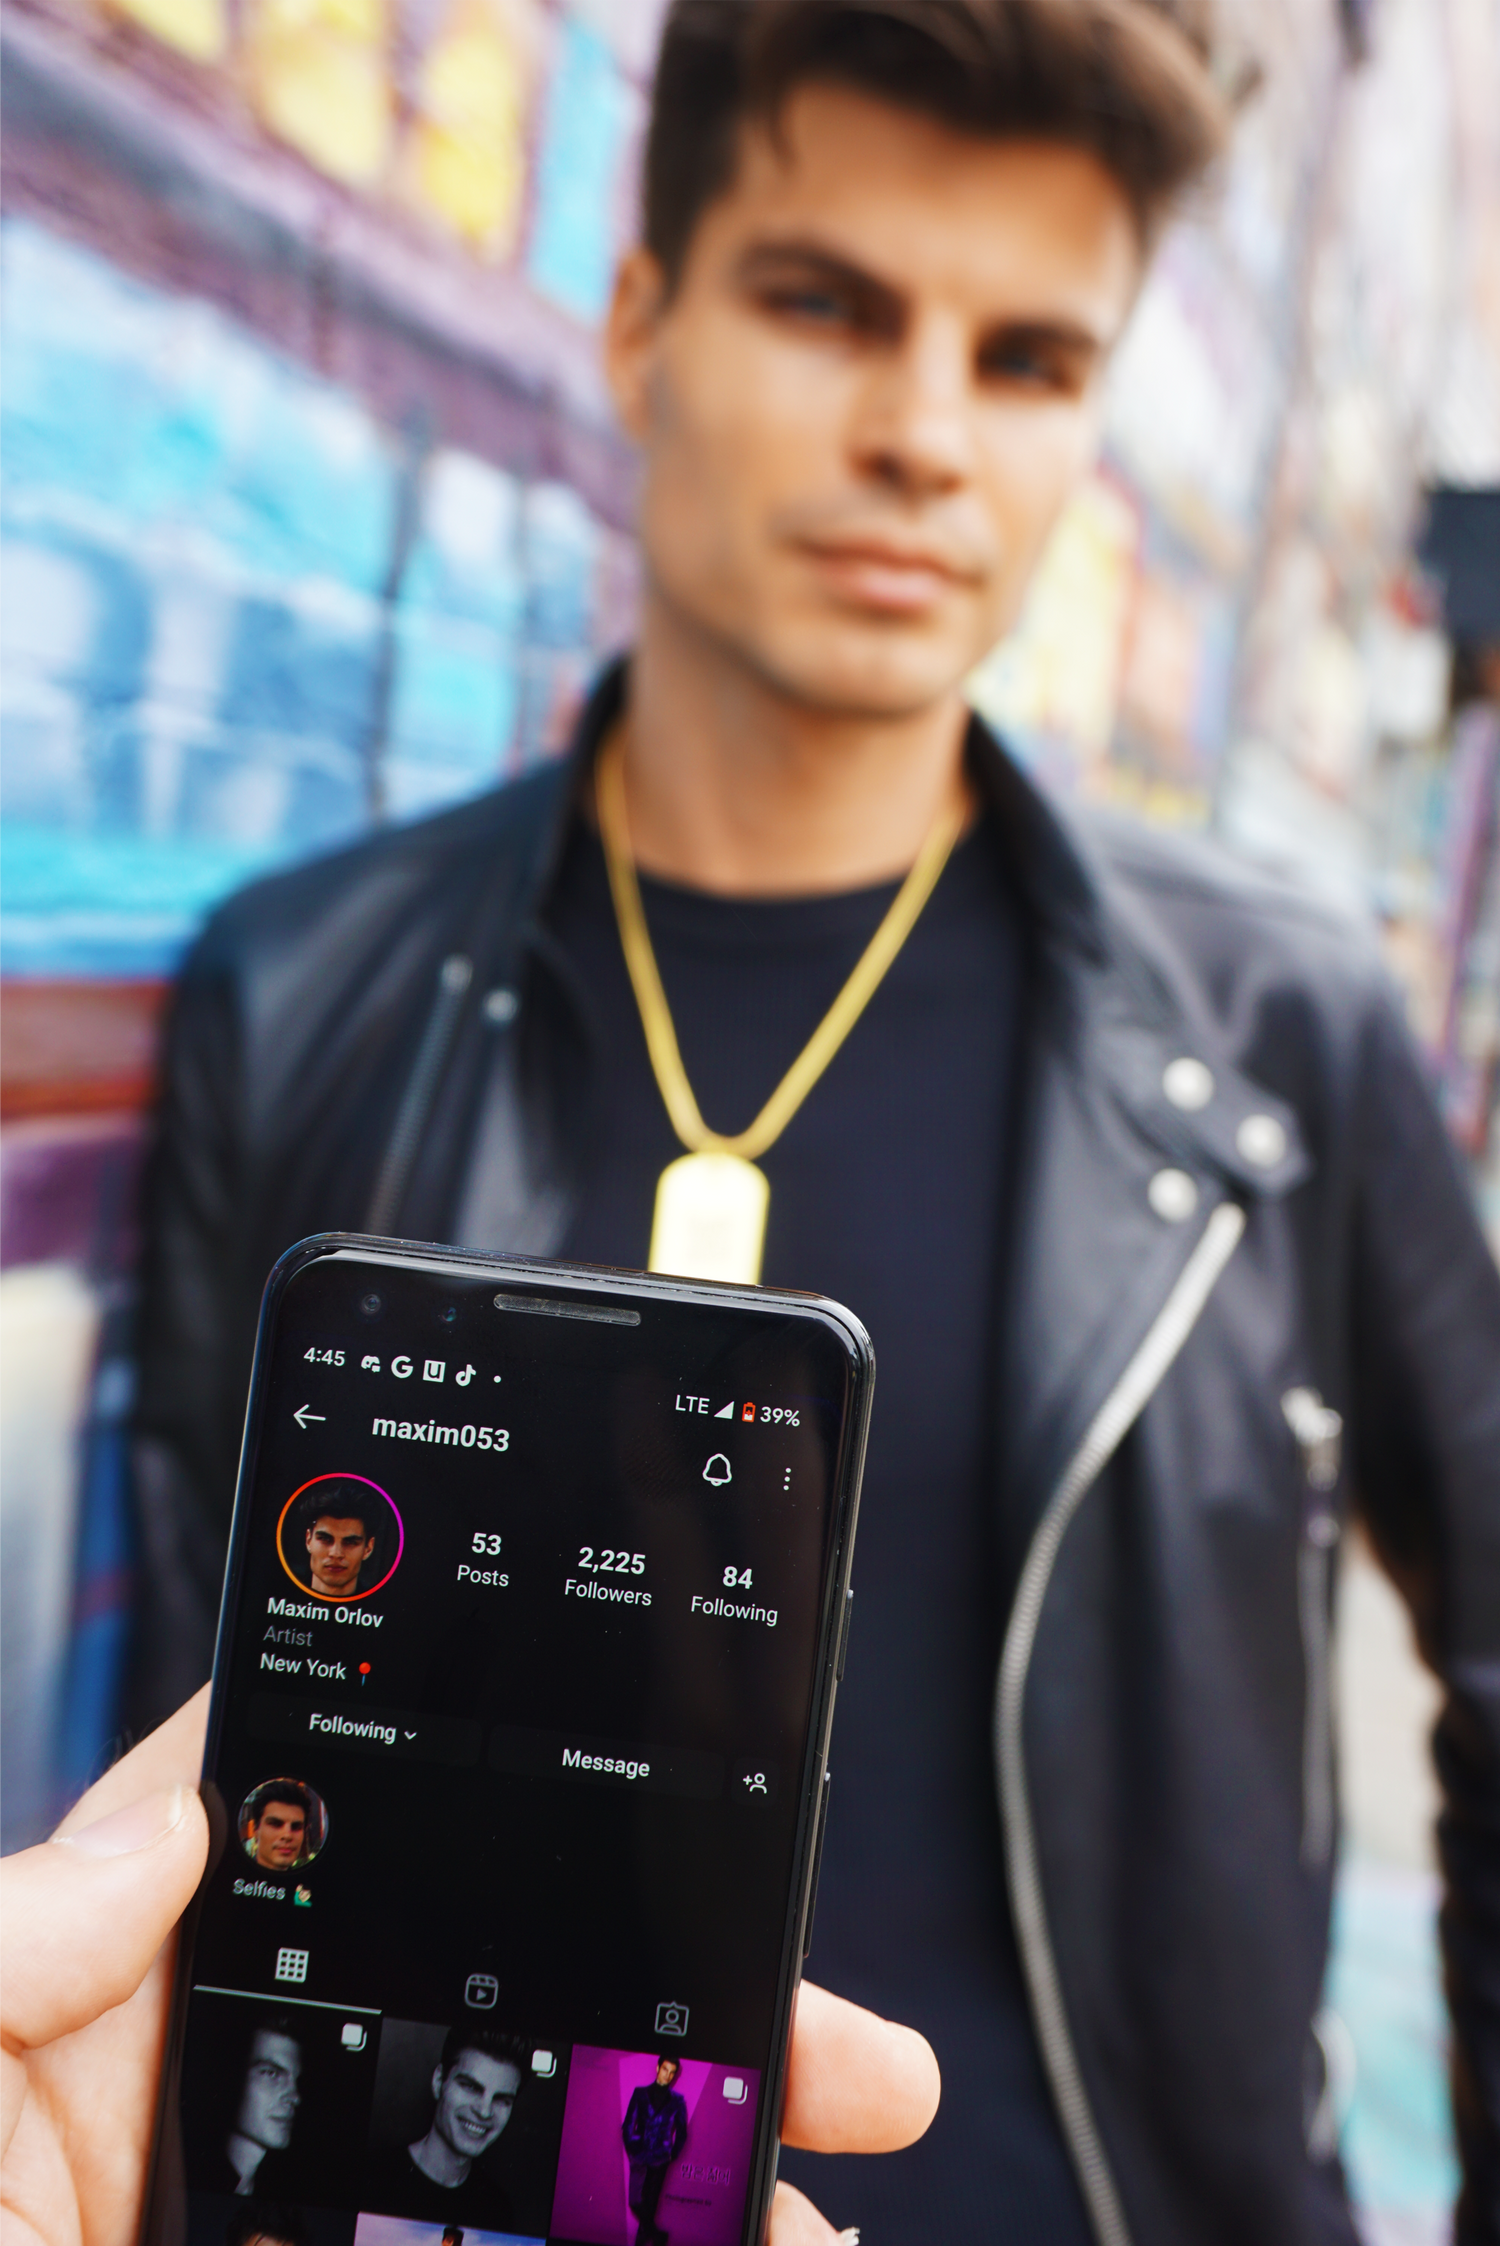 Max Taylor wearing a golden Jumptag, with a close-up phone in foreground displaying his Instagram profile after scanning it